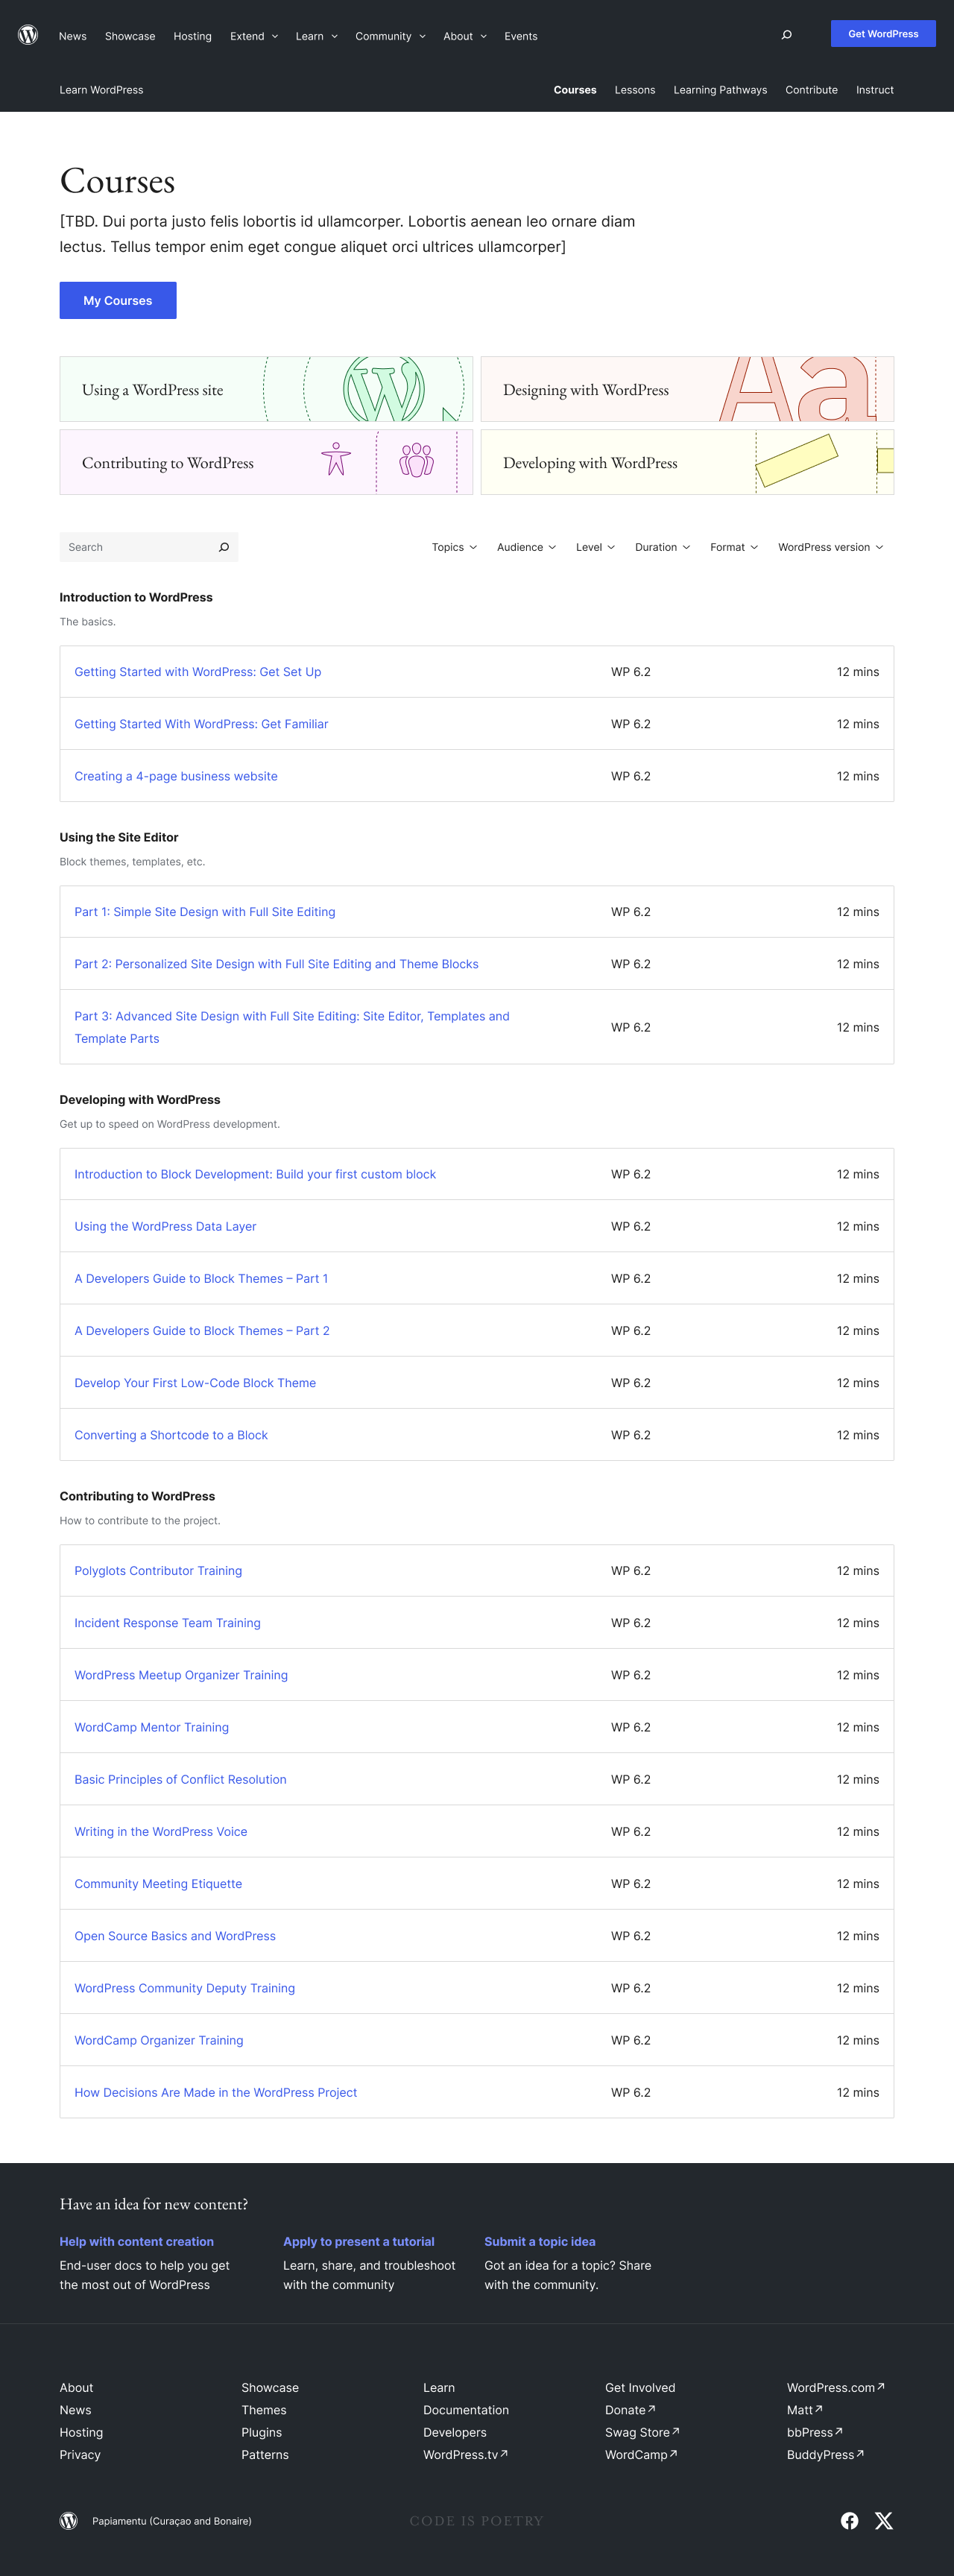 Screenshot of the "Courses" page with an example ordered list of lessons broken down by category.